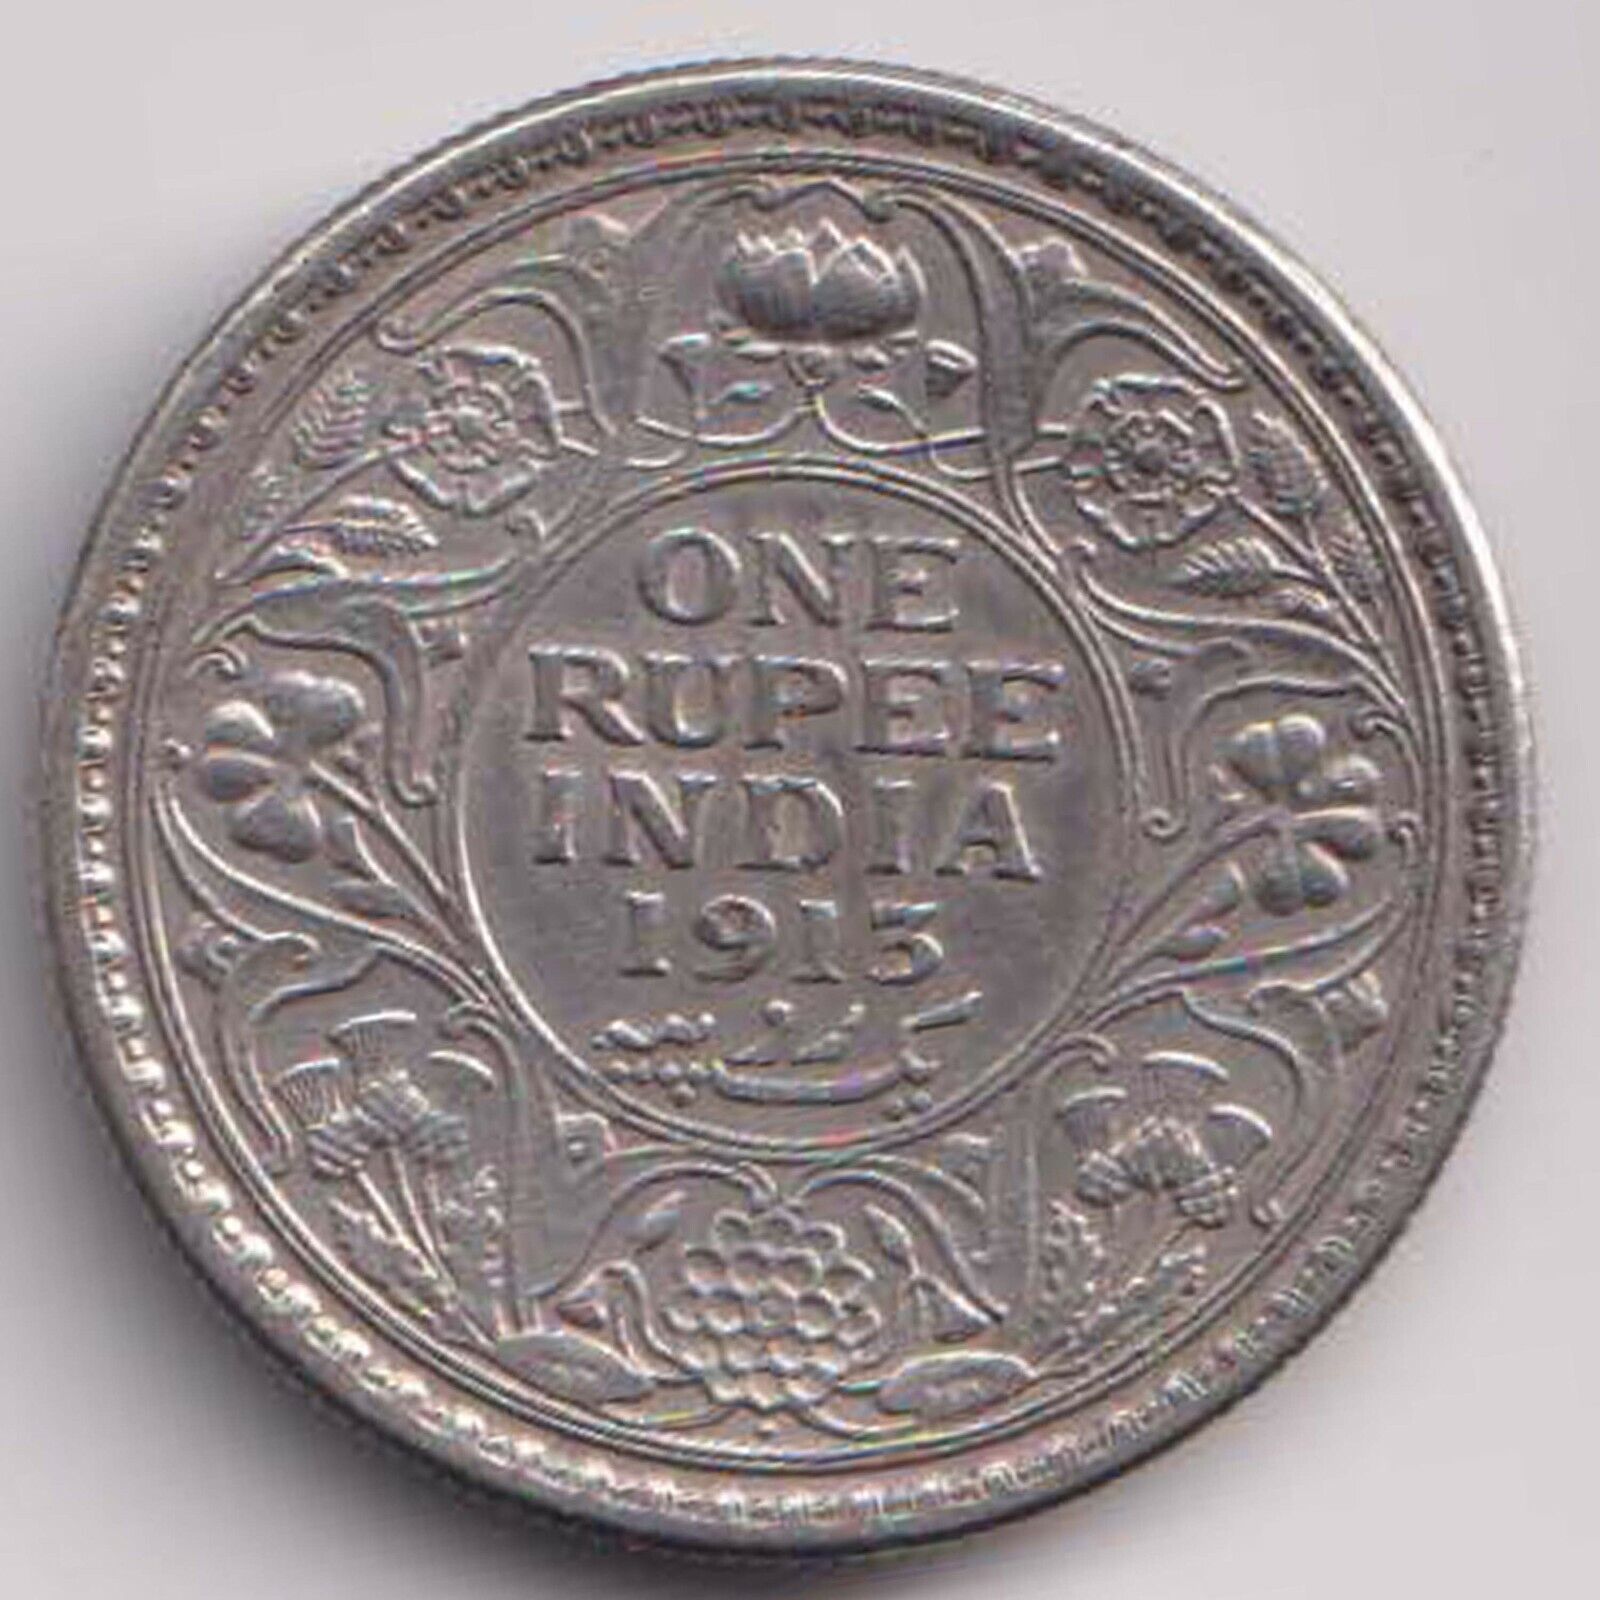 BRITISH INDIA -1913 - GEORGE V ONE GRADE Direct sale of manufacturer COIN Outlet ☆ Free Shipping RUPEE NICE SILVER